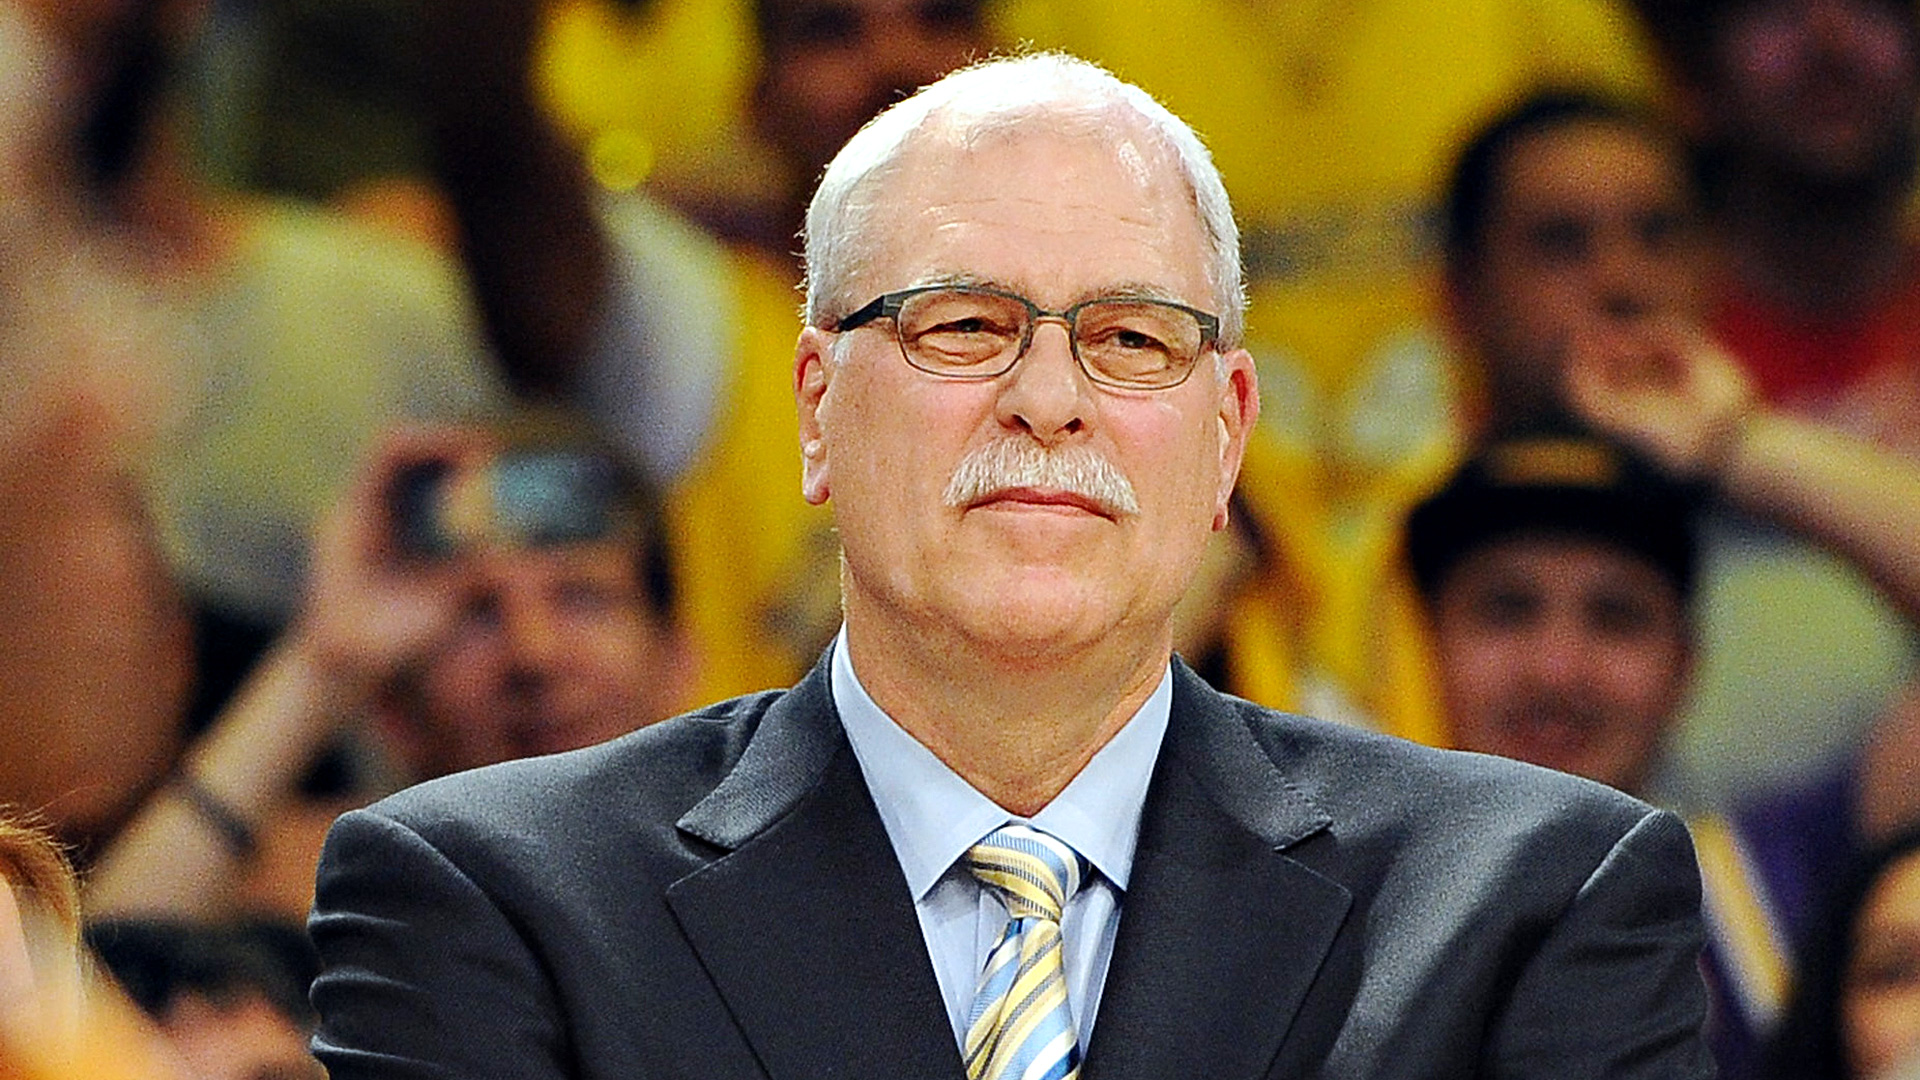 Phil Jackson turns 70 facts about the legendary Chicago Bulls and Los Angeles Lakers coach